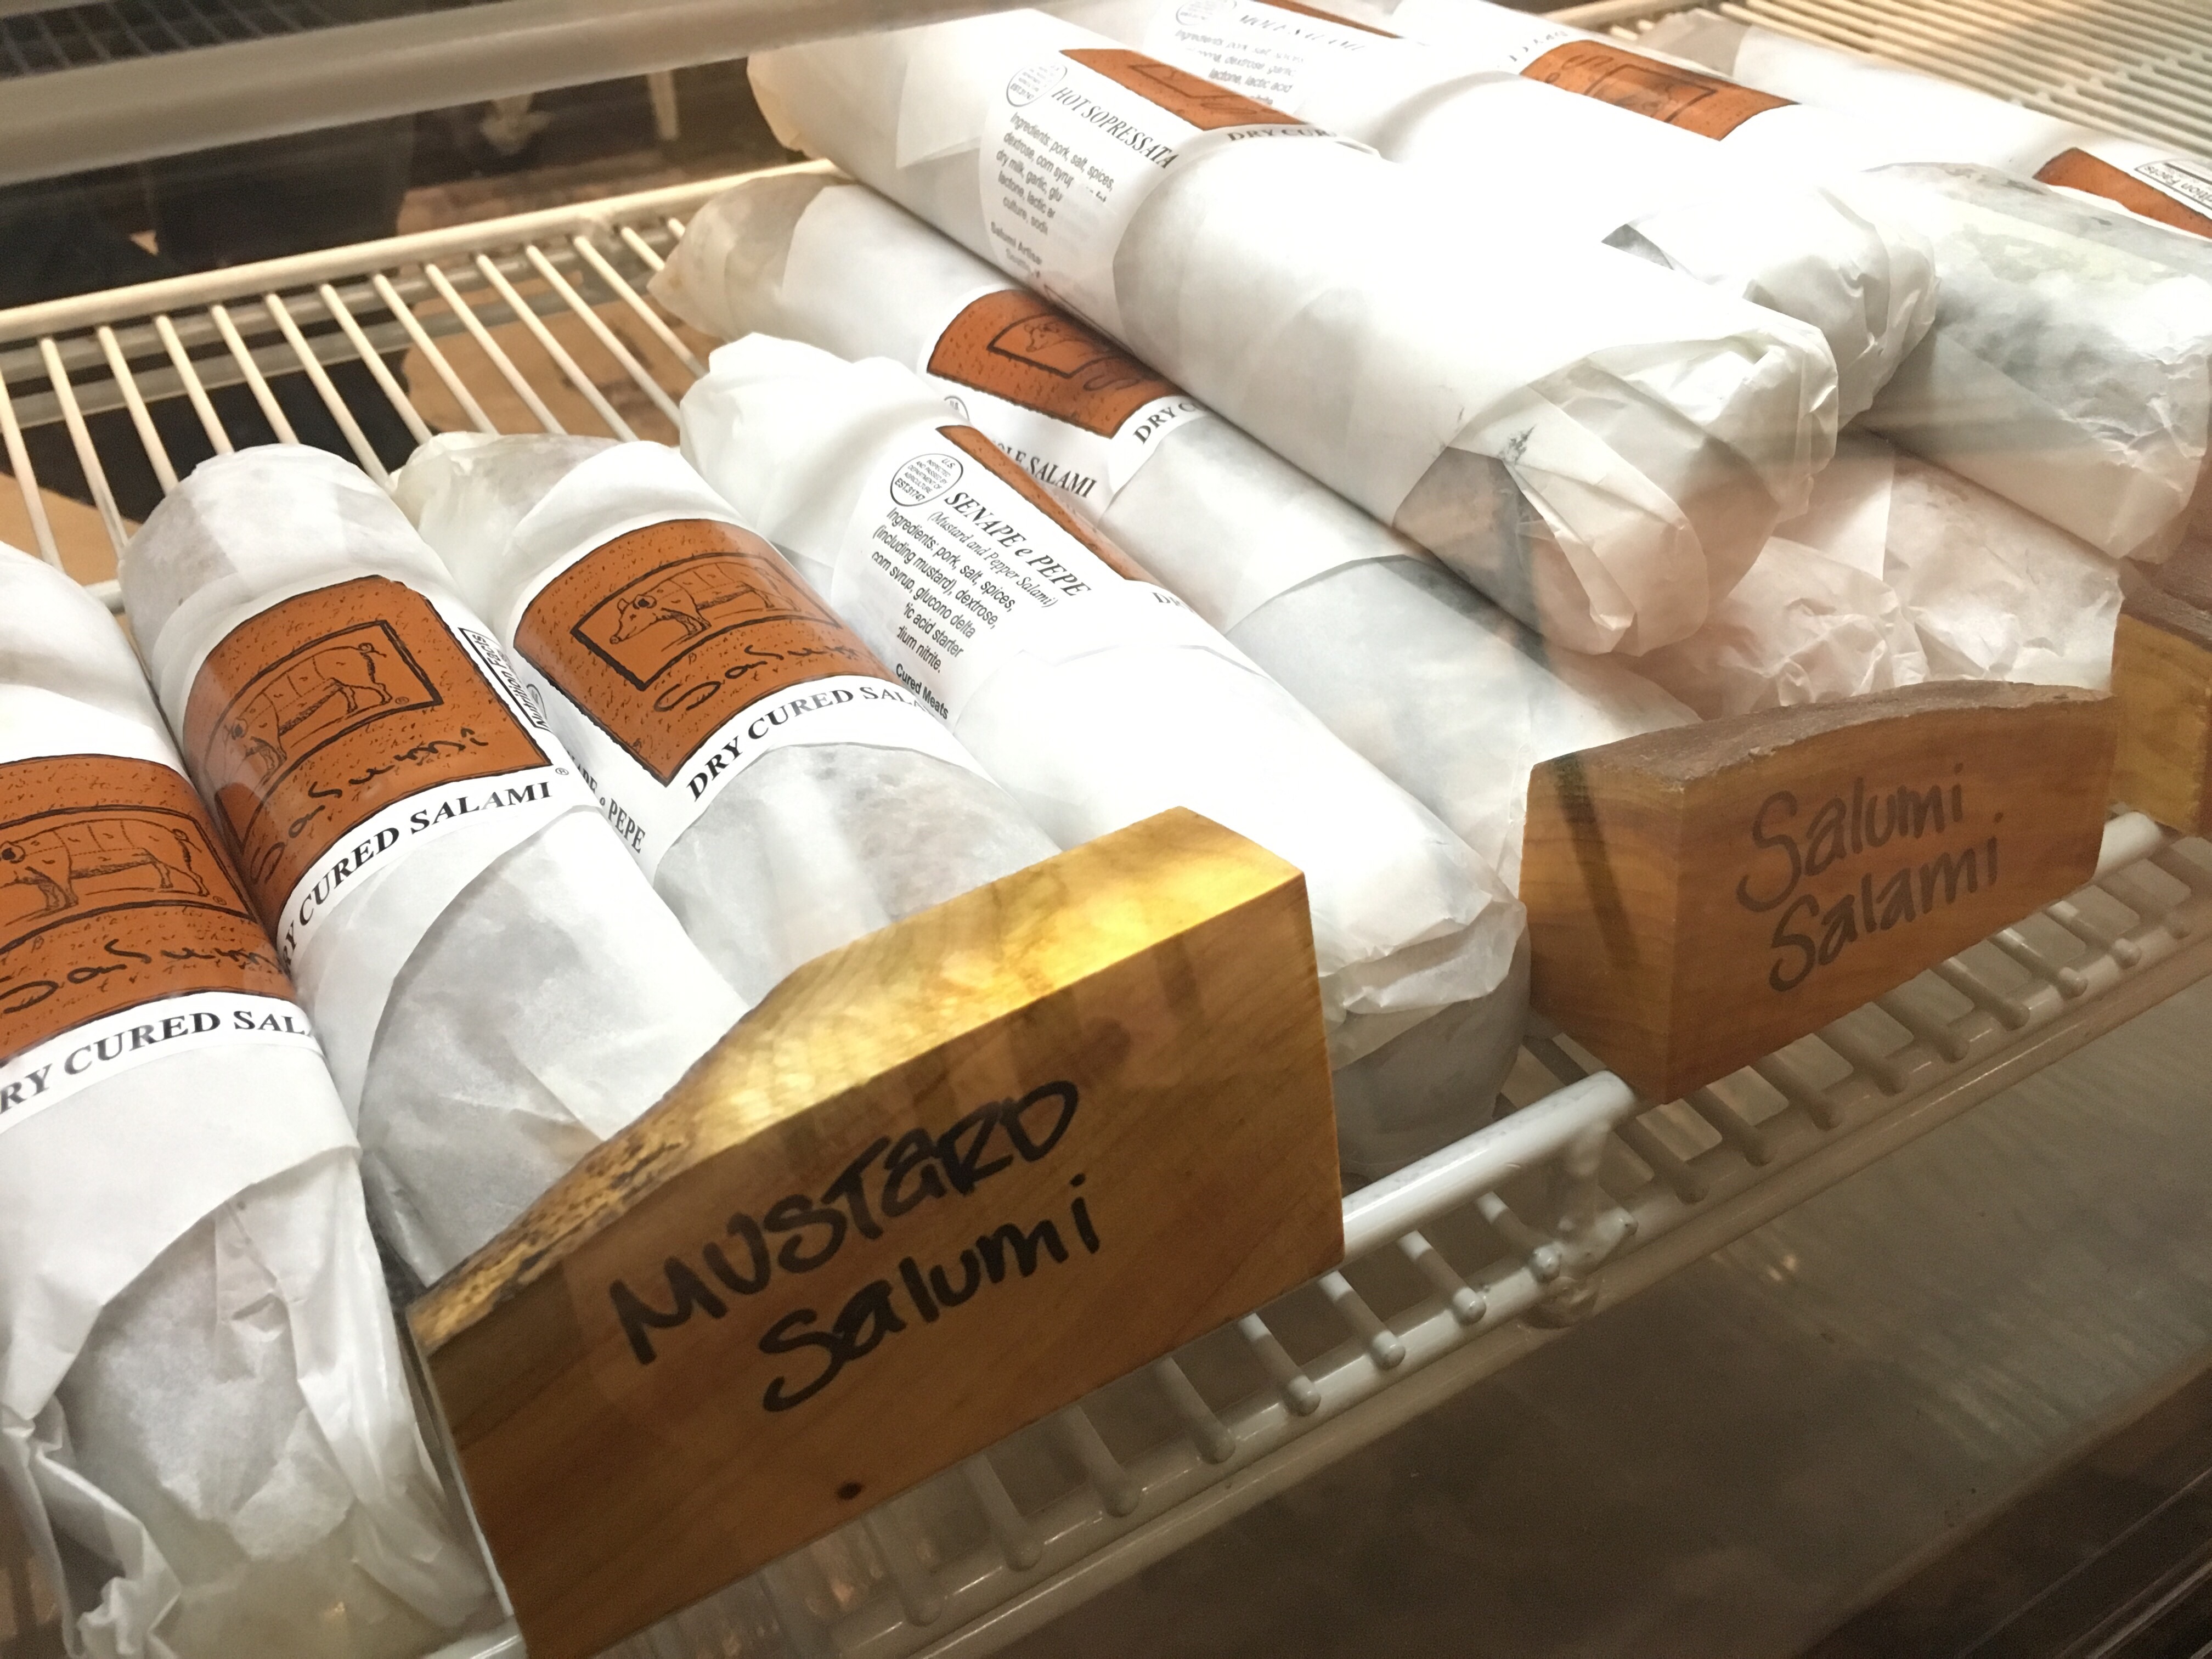 Drizzle offers a variety of fine salumi, cheese and more in their deli case at the rear of the store.